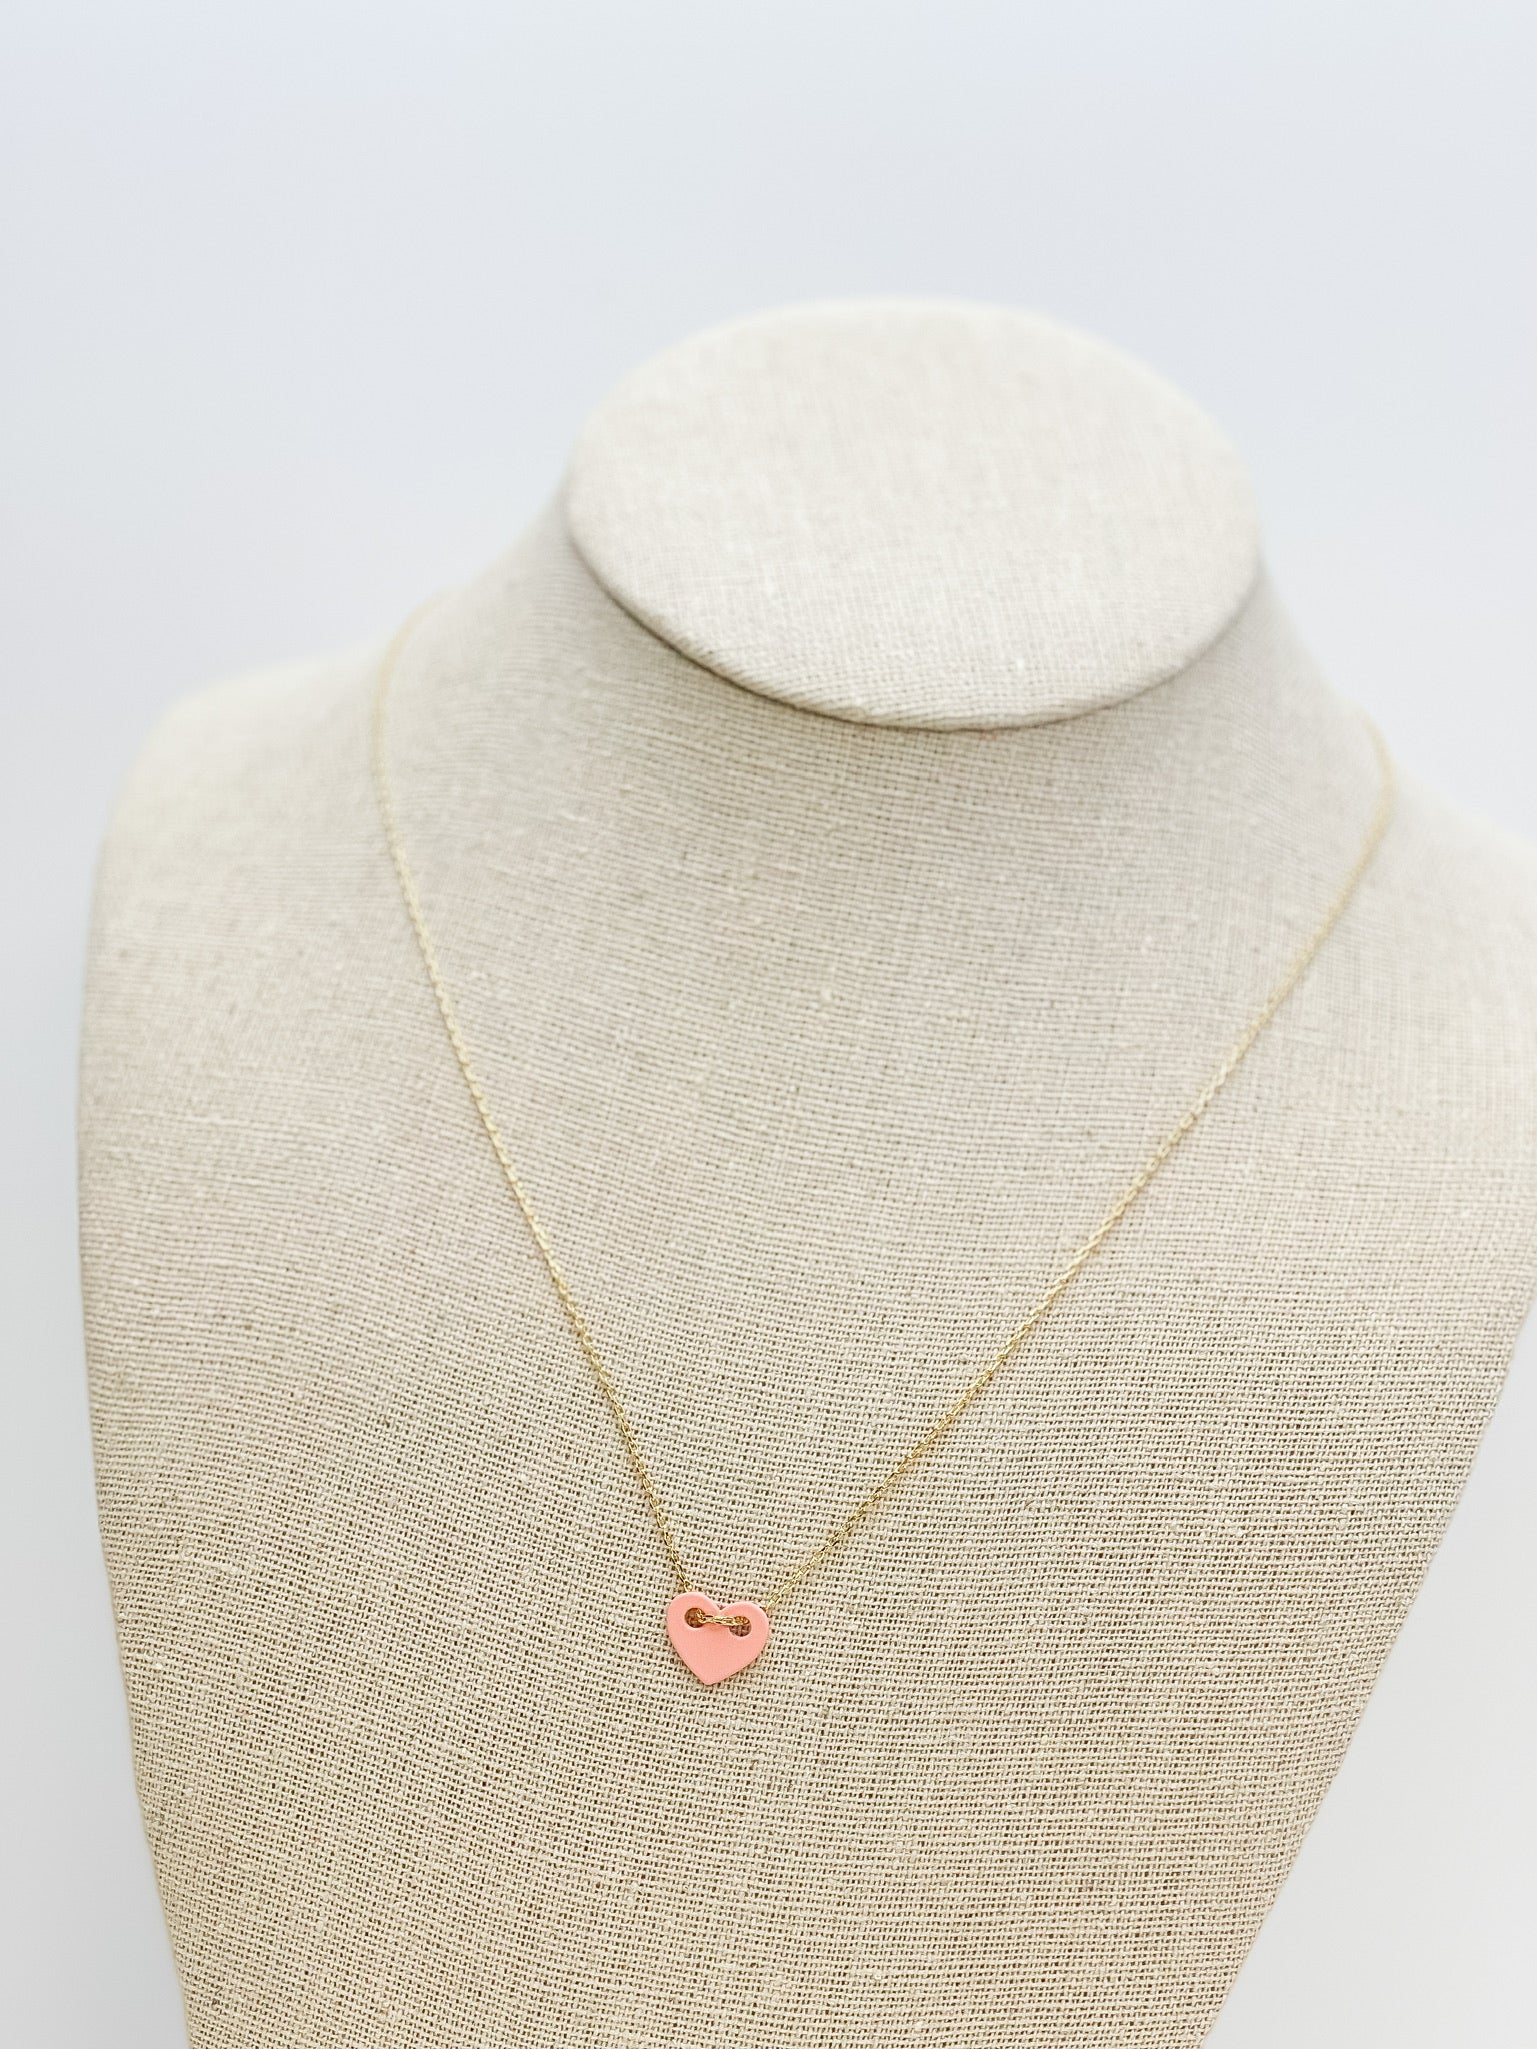 Simple Pink Cutout Heart Necklace